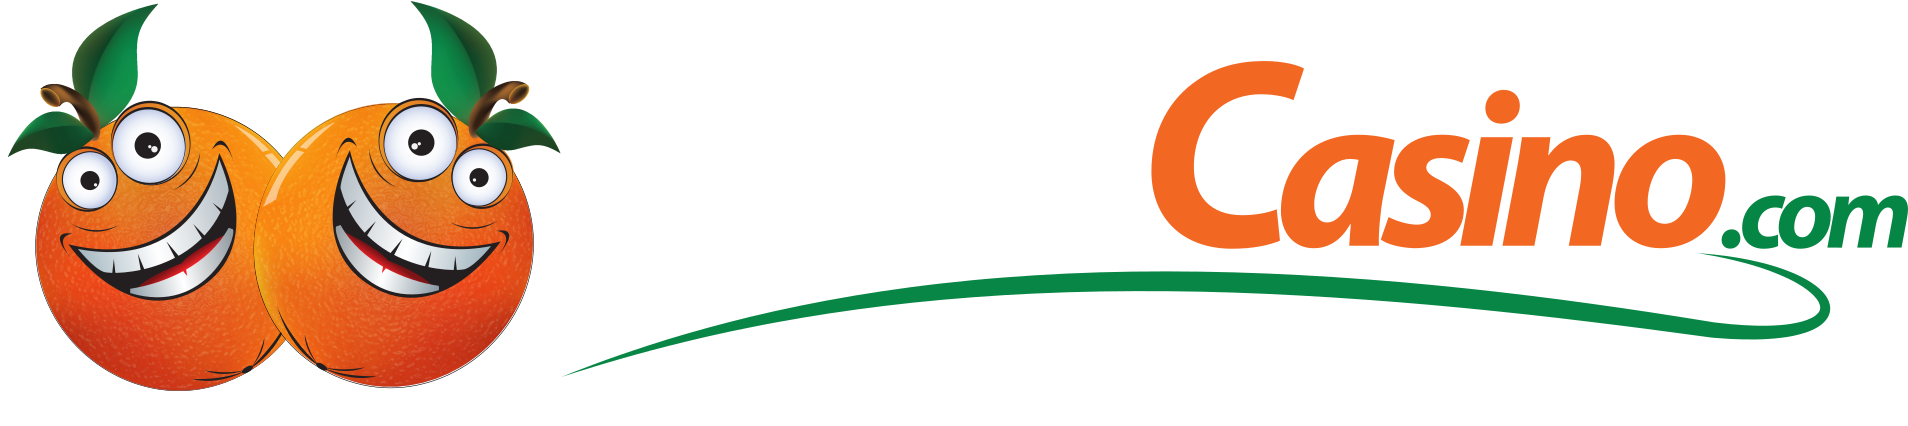 Casino as One of the Safe Casino Sites Listed with fastet withdrawals